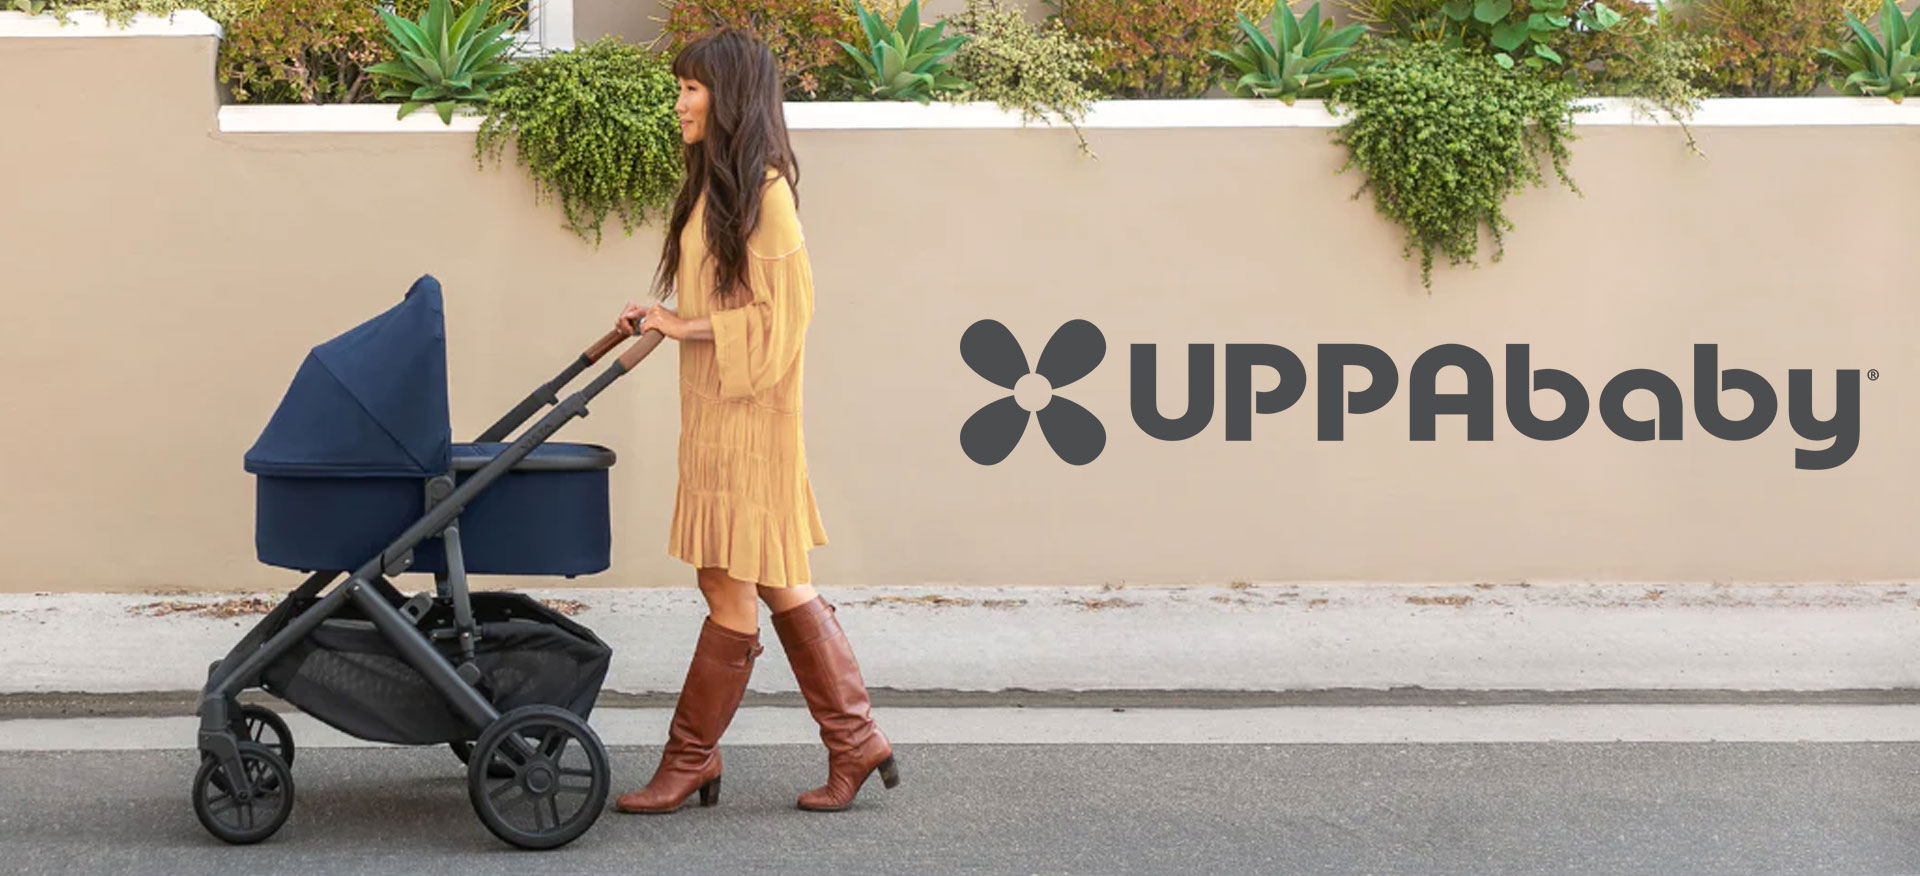 uppababy-bannière-1920x879